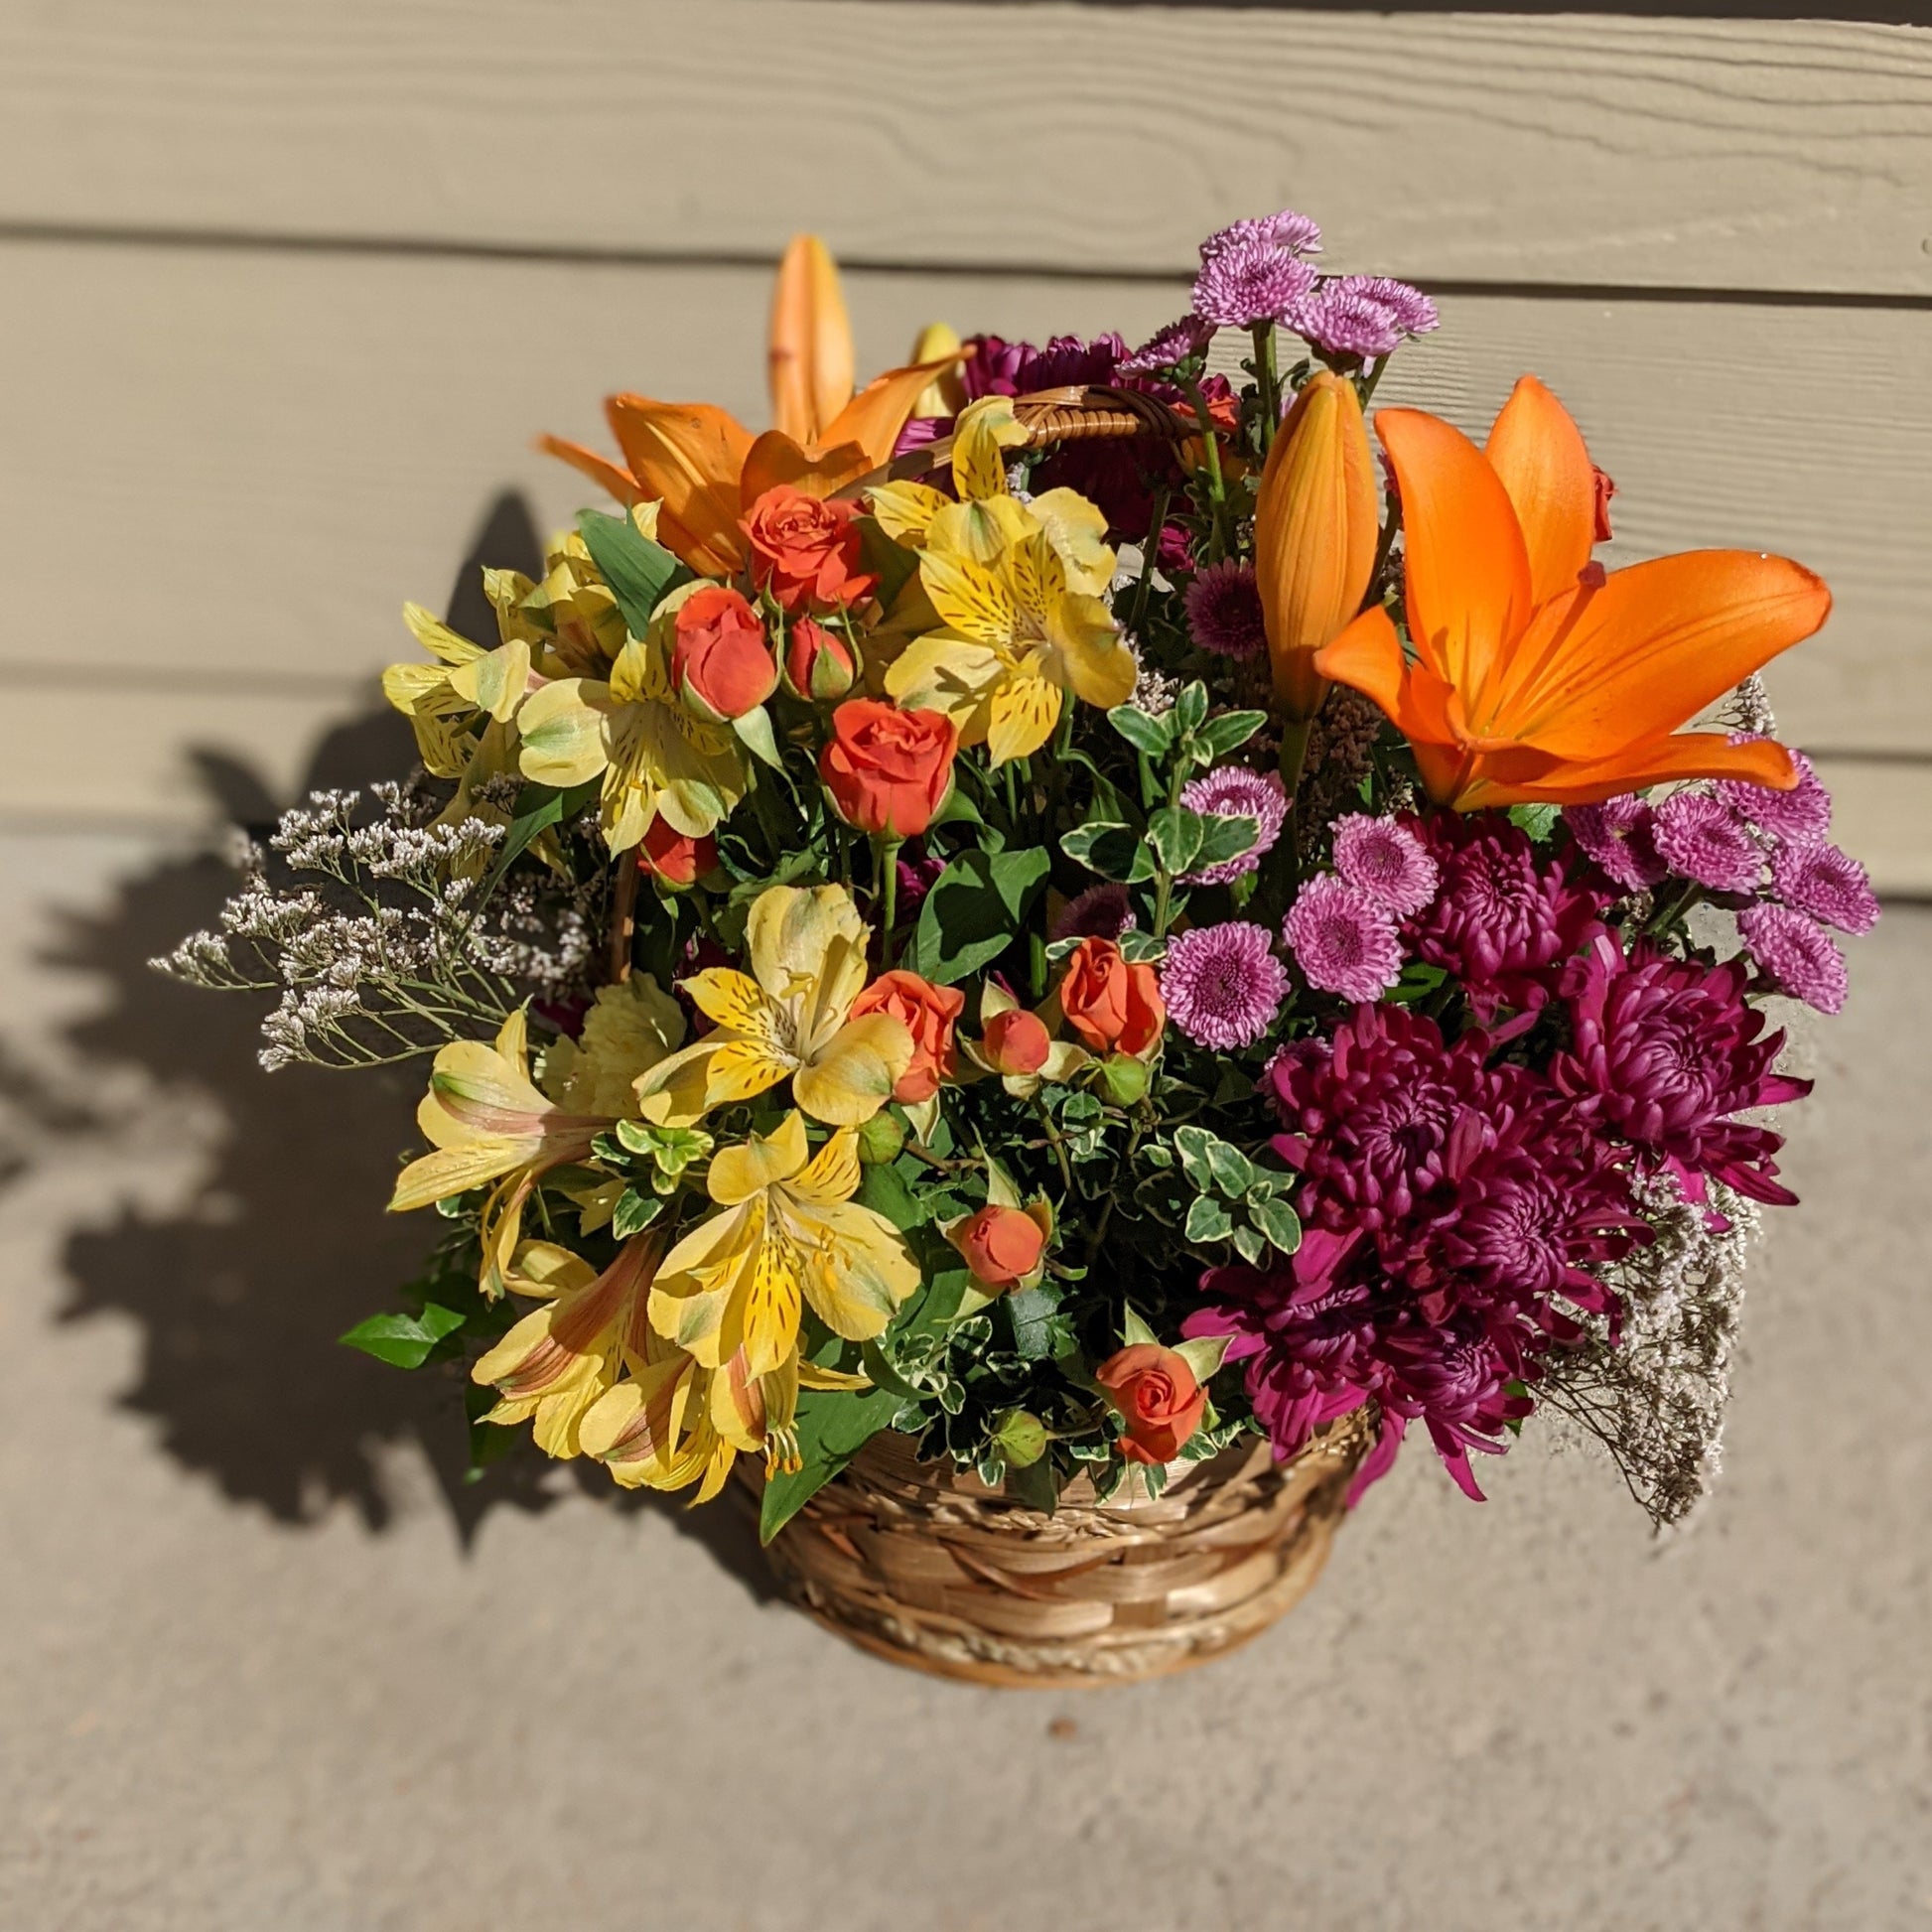 Basket of mixed fresh flowers. This photo has flowers like alstromeria, spray roses, mums, buttons, and lilies. 